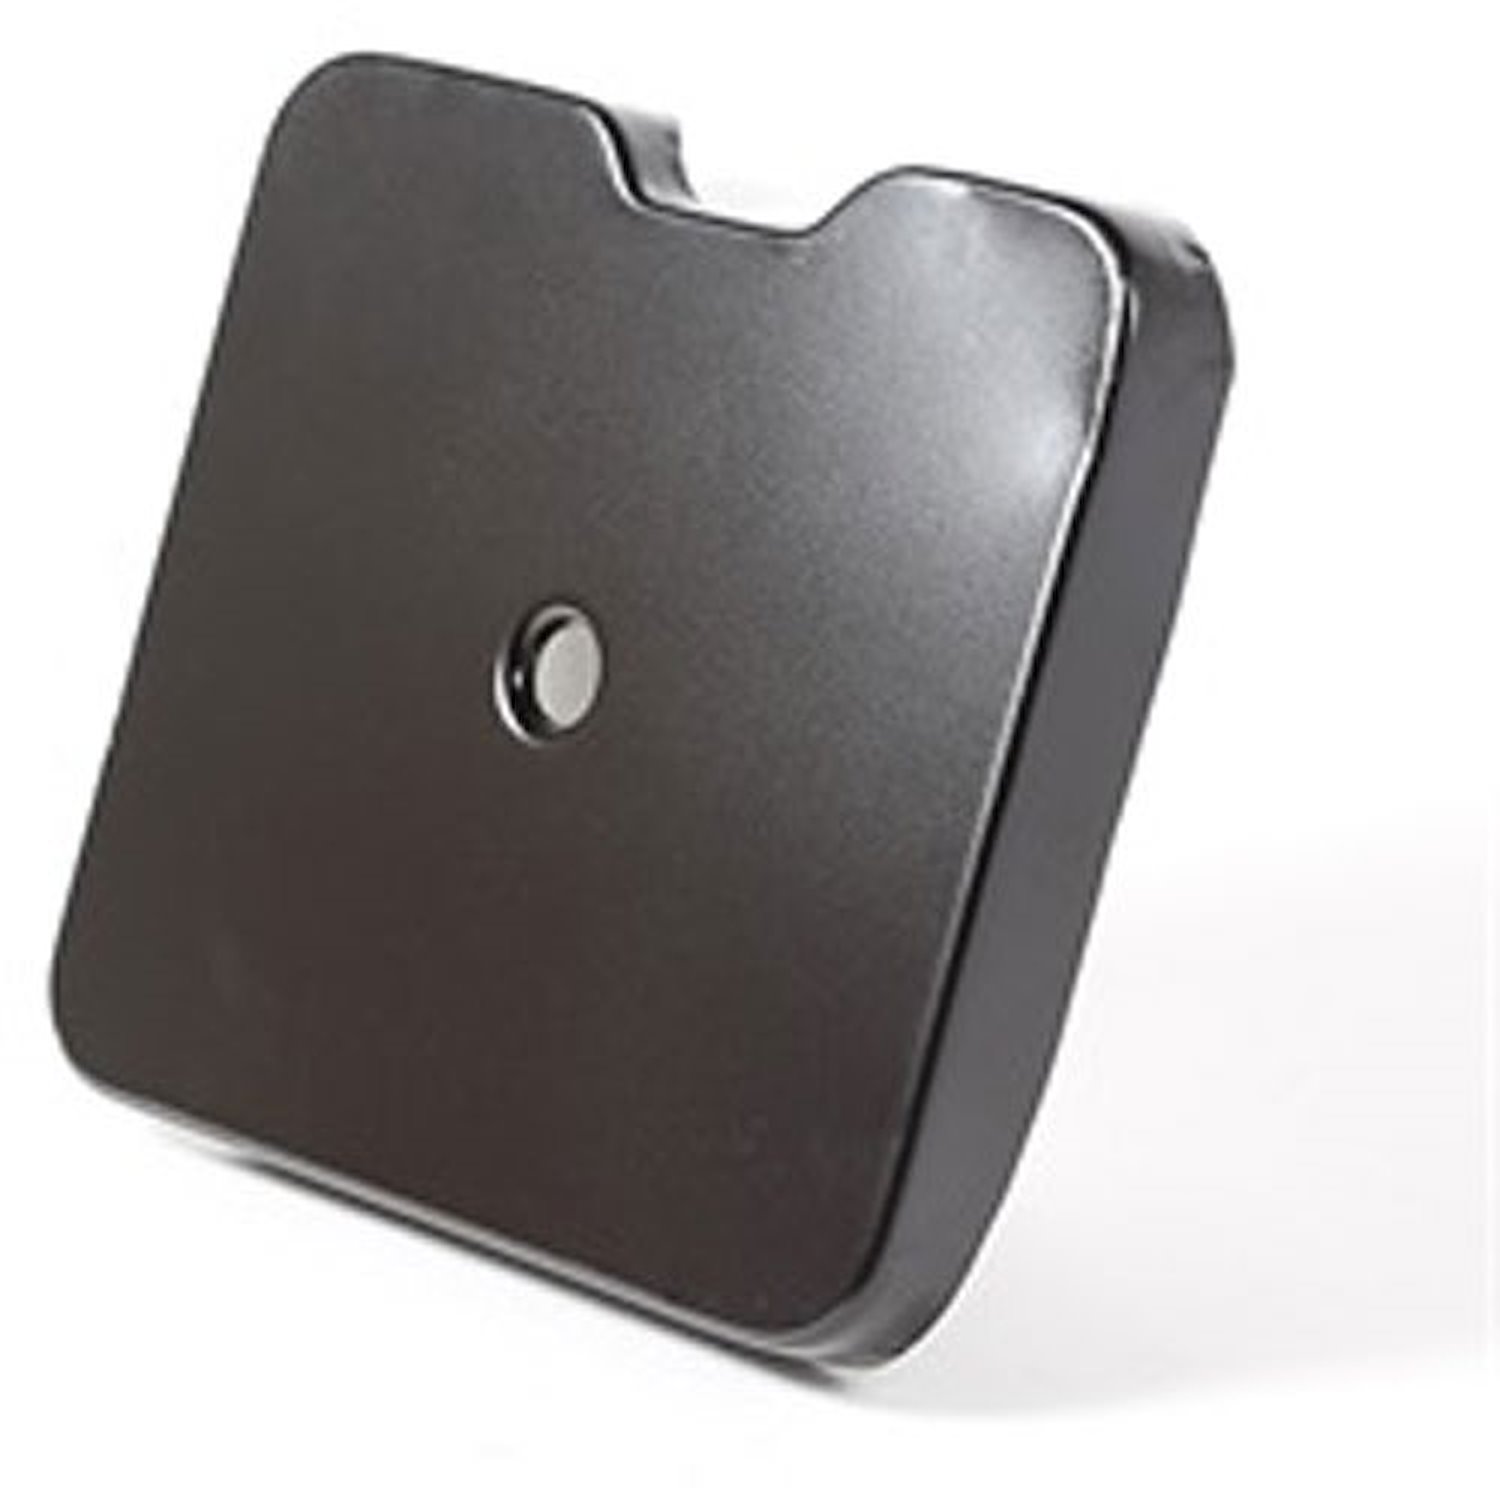 This roll bar mounting bracket from Omix-ADA fits Jeep CJ-7 models.